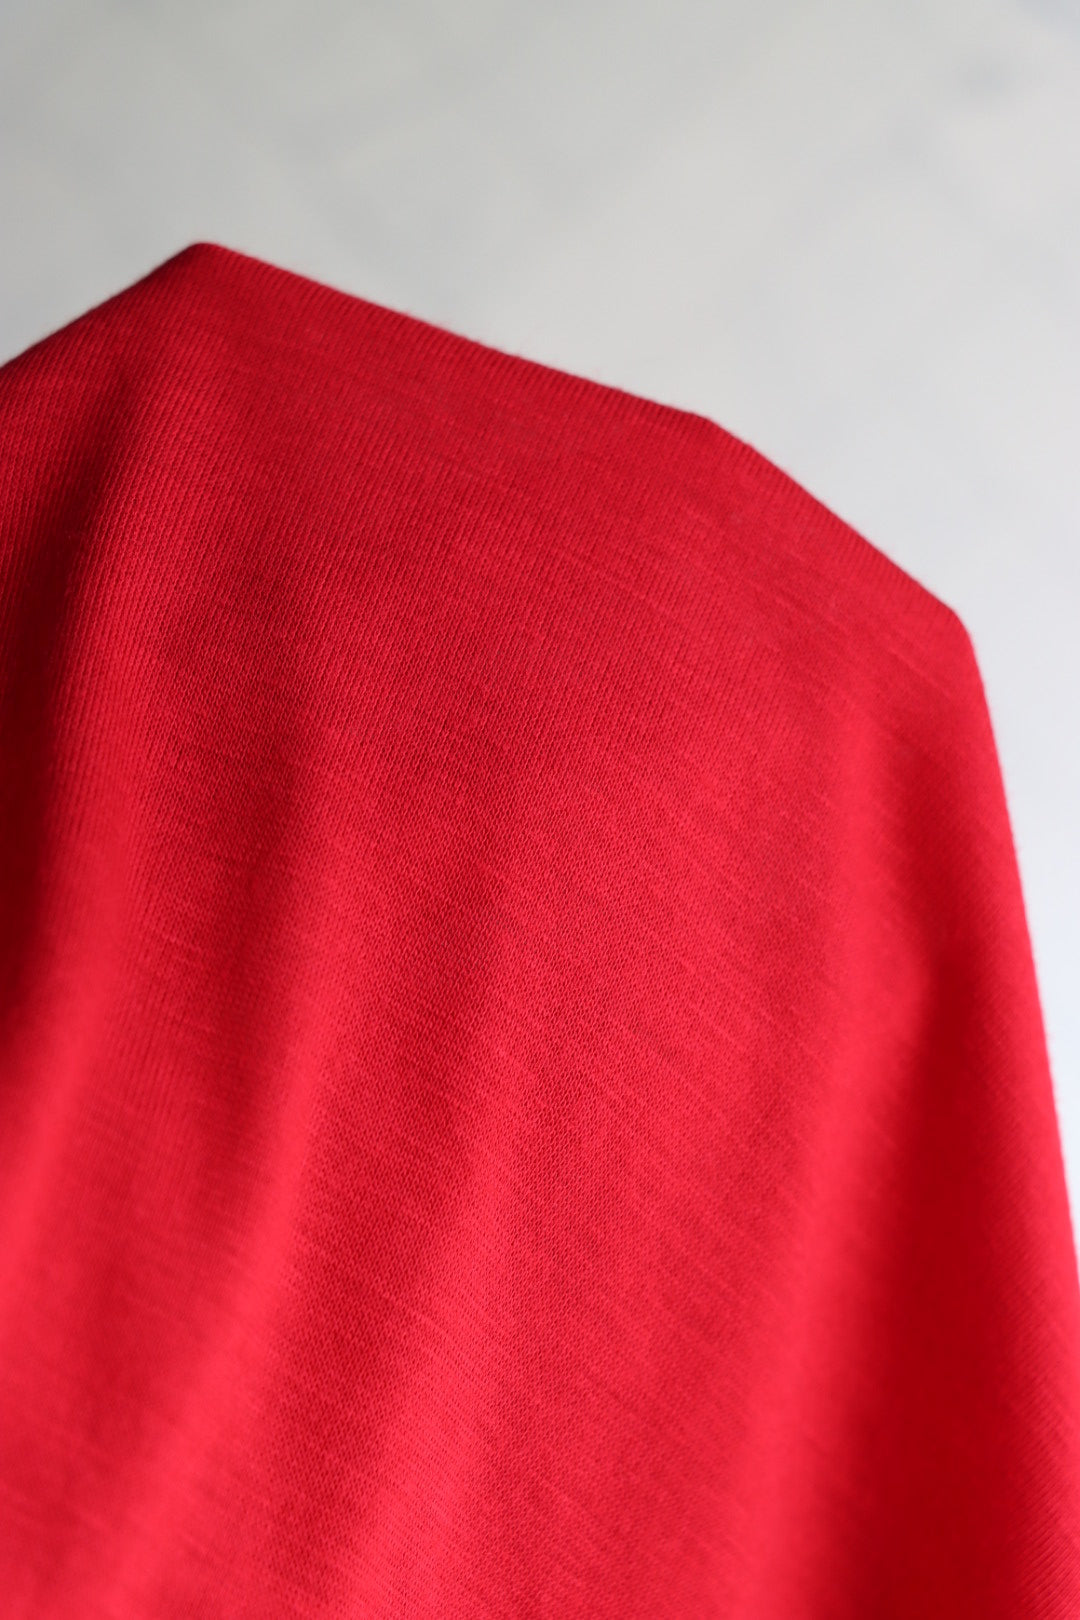 Red Rayon Jersey | Surge Fabric Shop